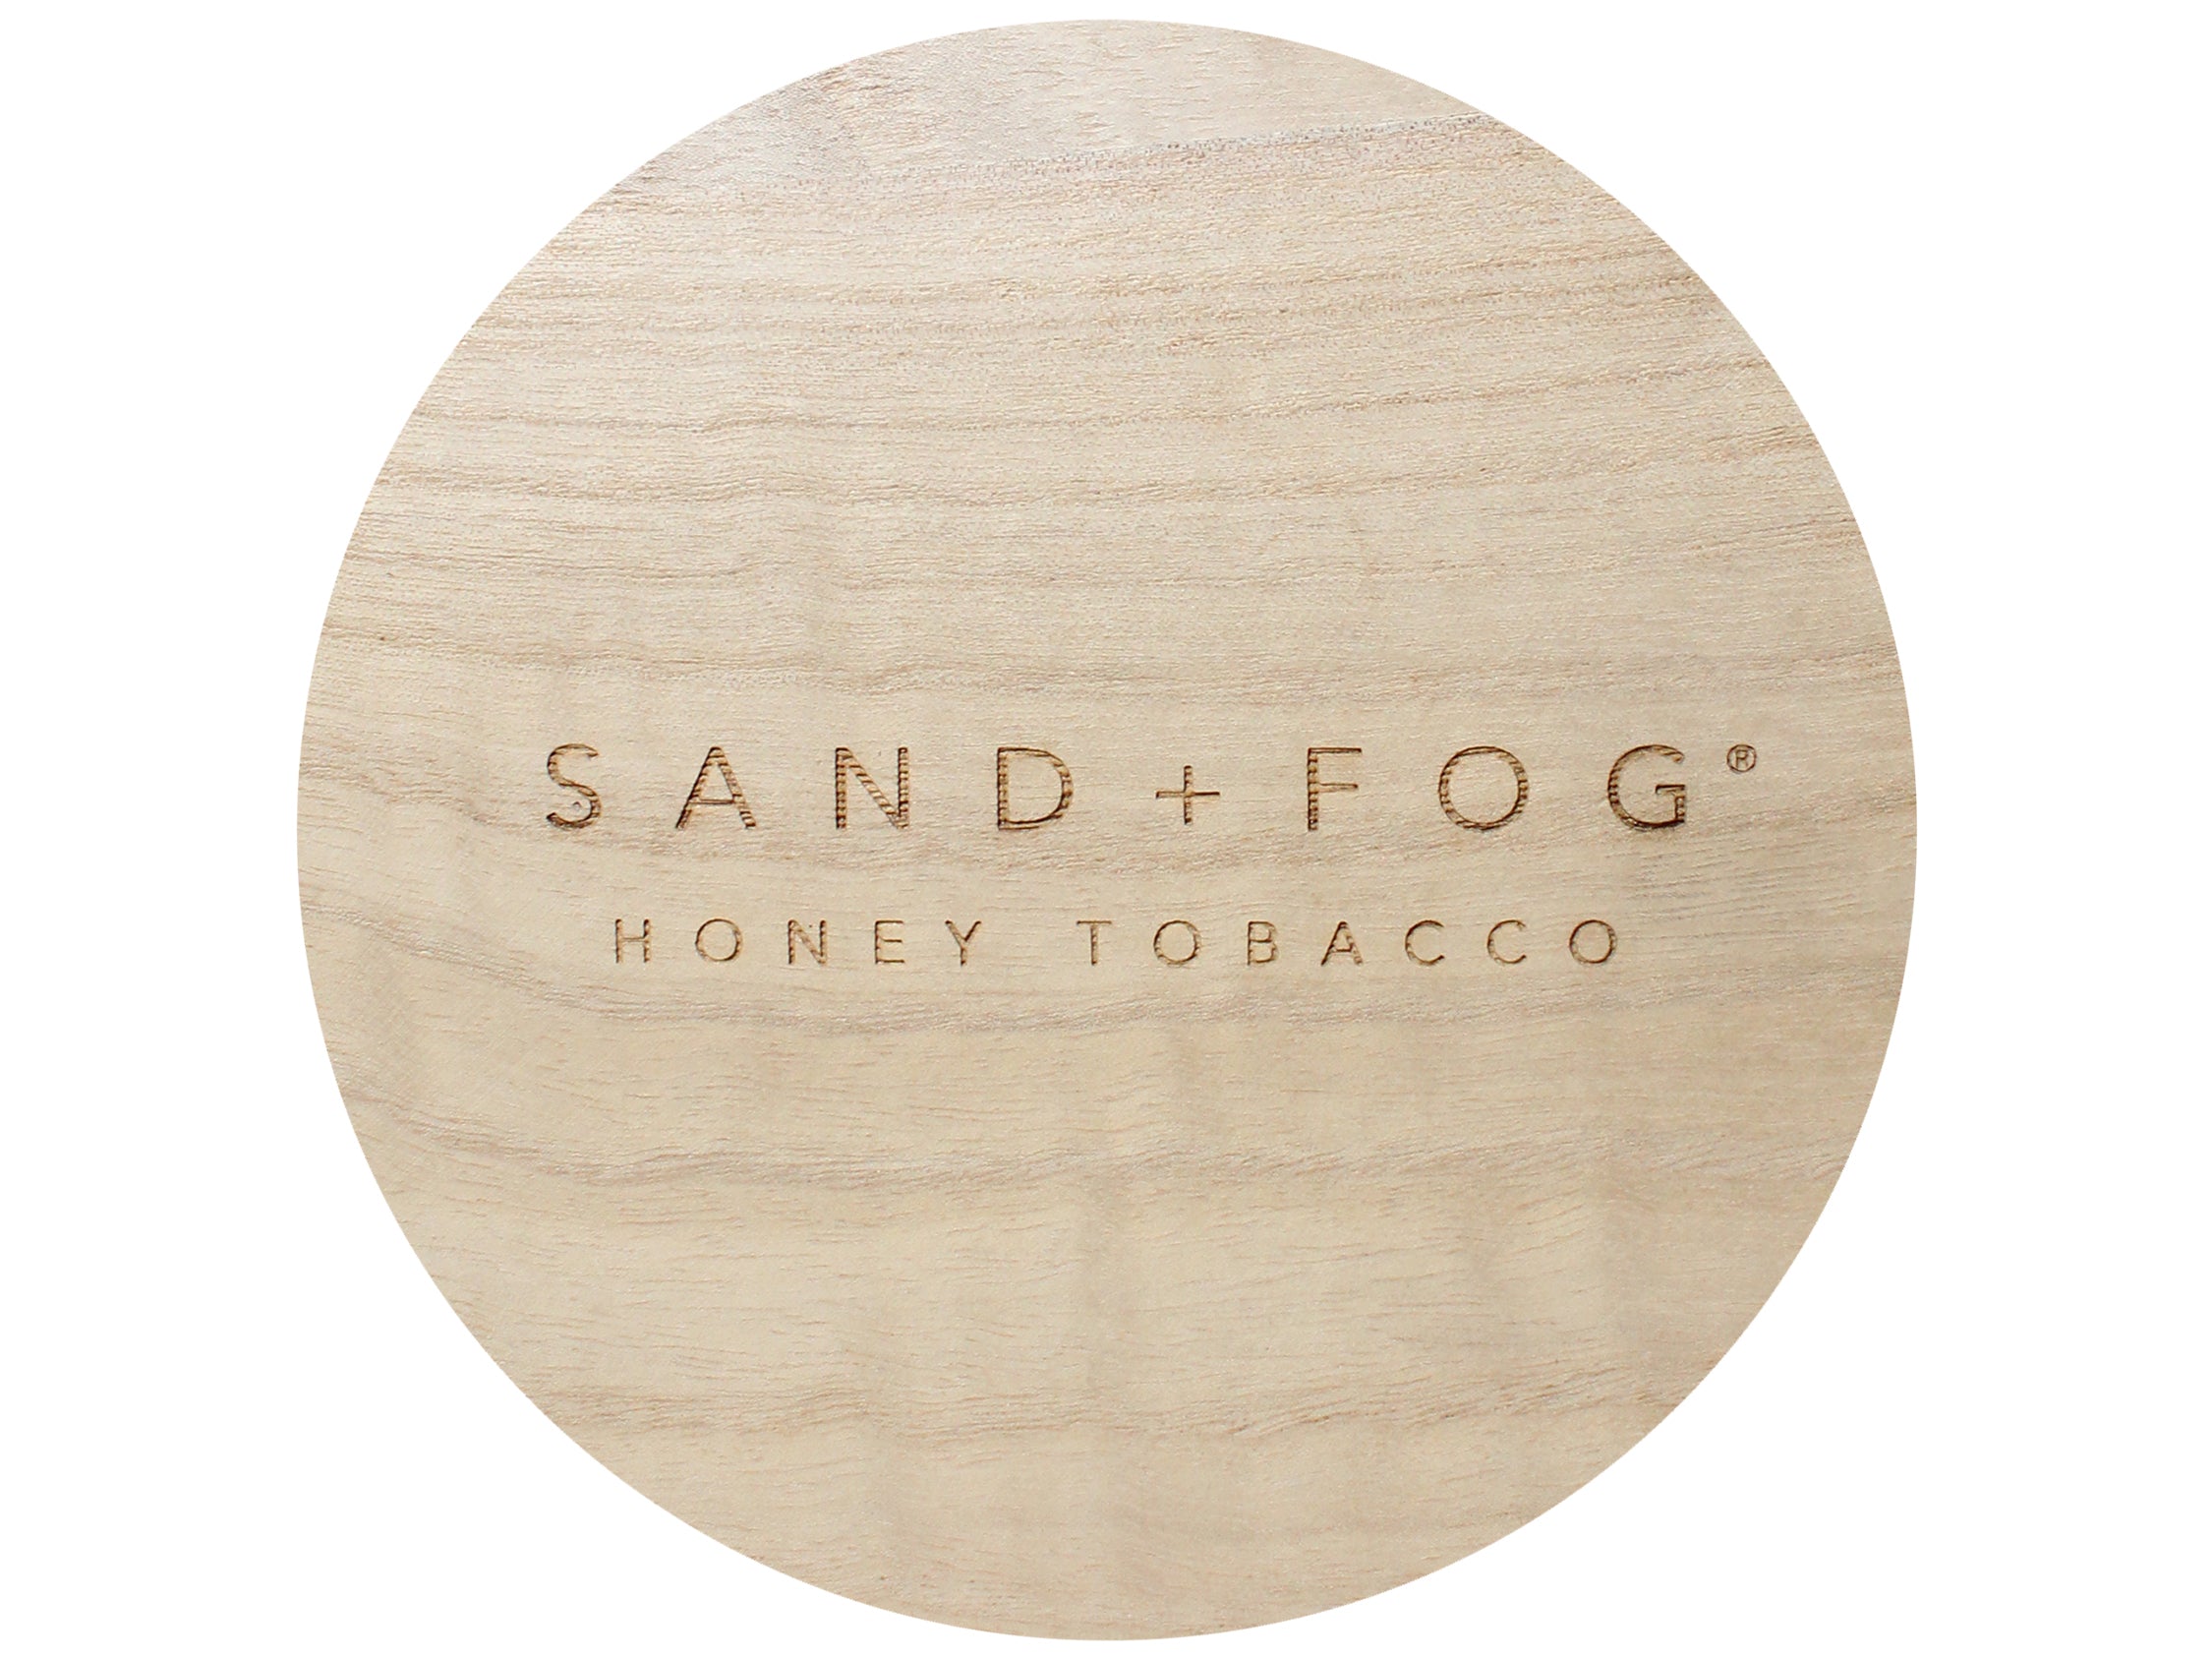 Honey Tobacco 23 oz scented candle Gray vessel with Sand+Fog wood lid